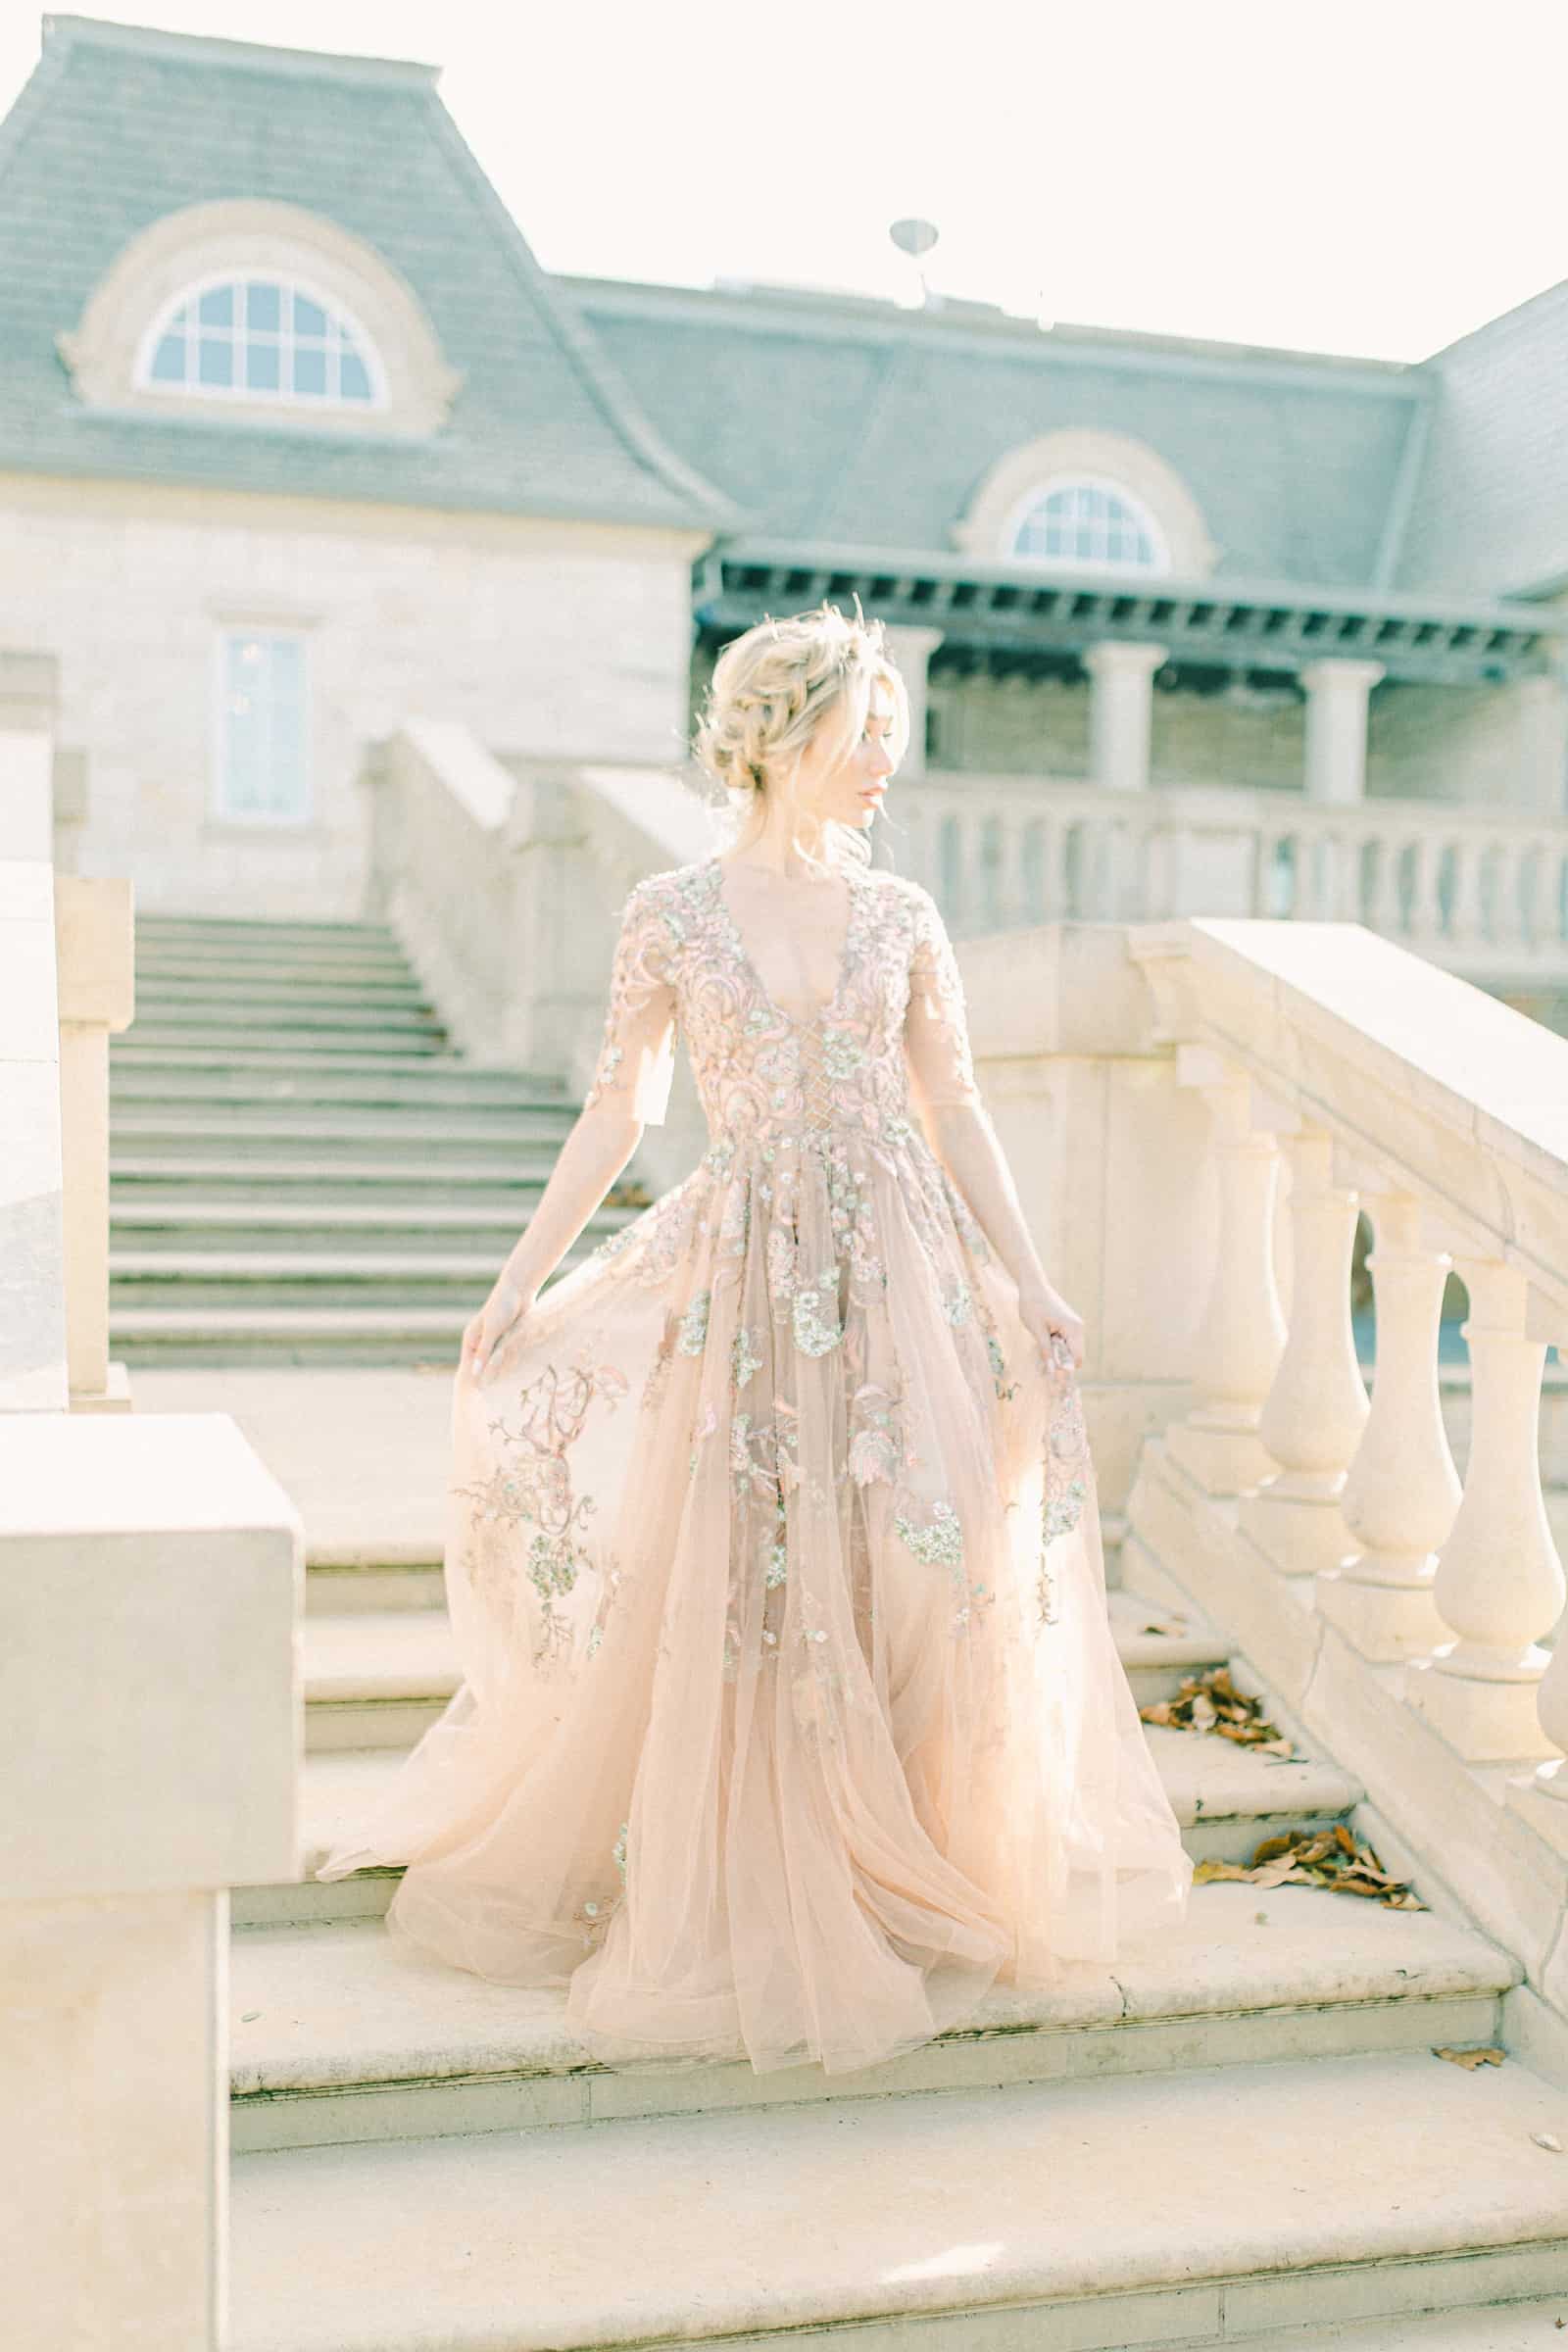 Bride walking down staircase wearing YSA Makino couture wedding dress with floral embellishments and embroidery, flowy wedding dress